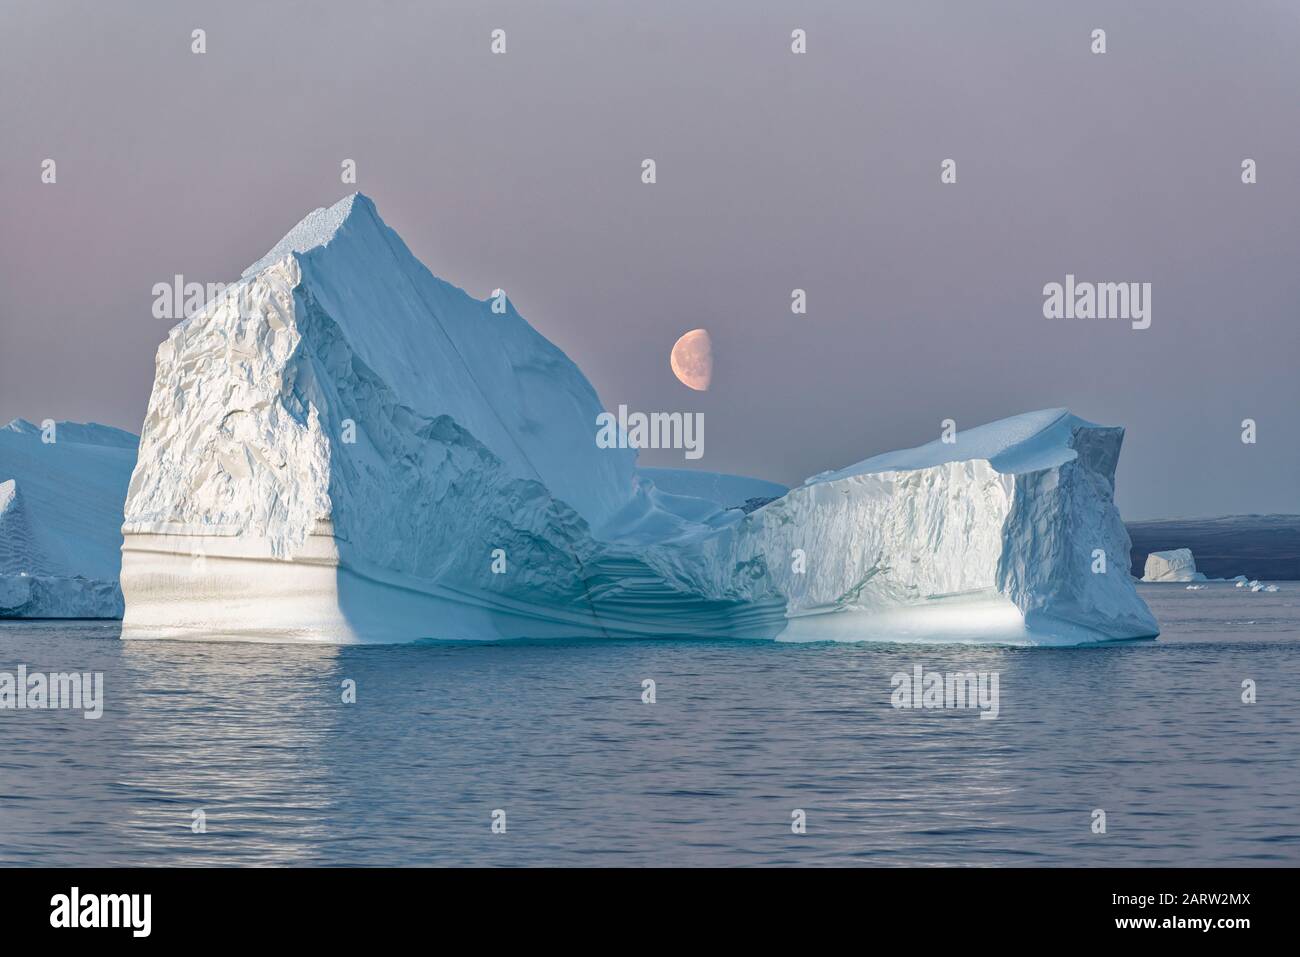 Huge floating iceberg in a fjord at sunset with moon in the middle, fjord, Scoresby Sund, Kangertittivaq, Greenland, Denmark Stock Photo